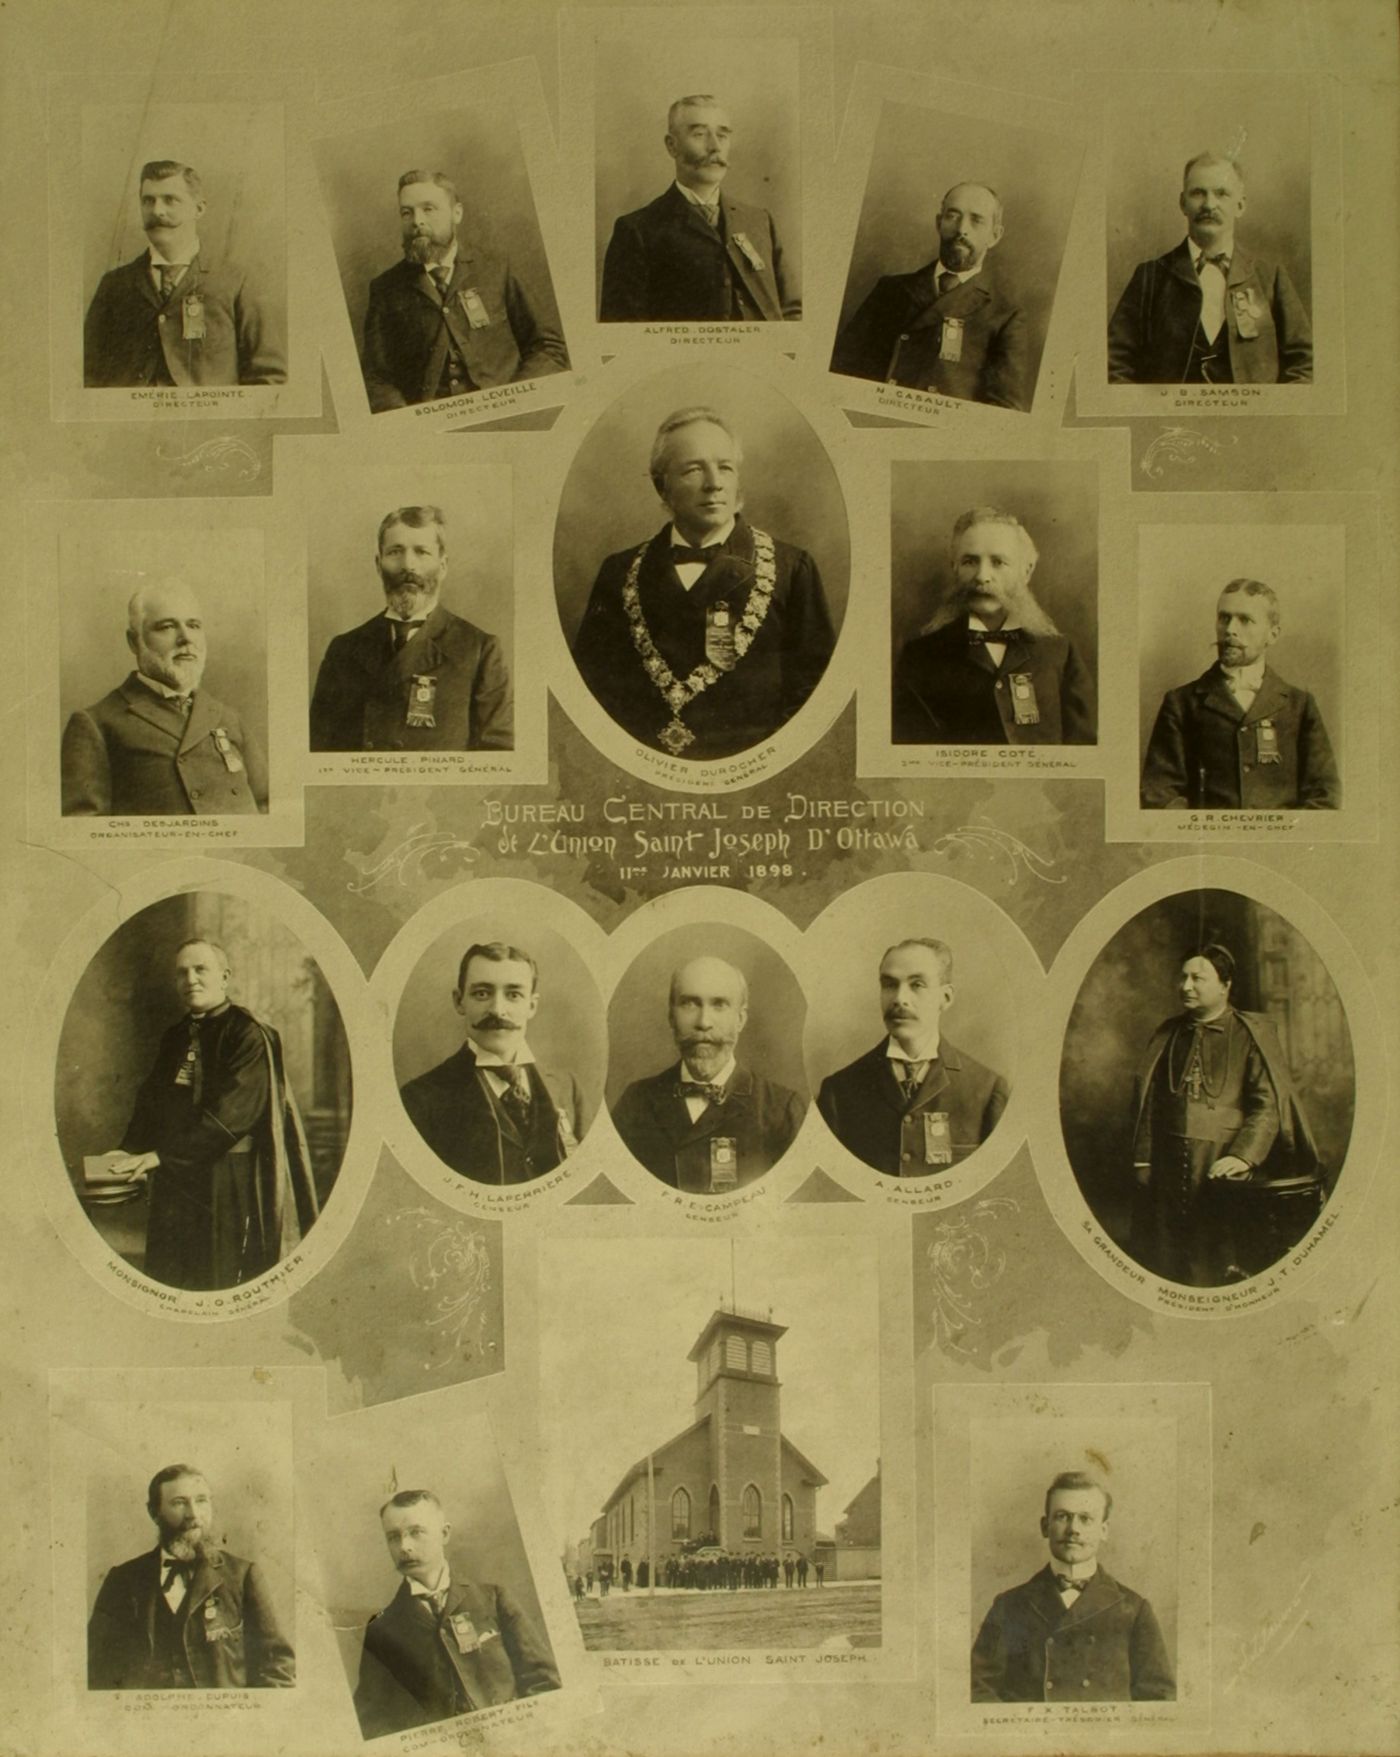 Display board with 18 black and white photographs, depicting men in suits and ties, with the exception of two clerics. Names and titles appear below the photographs. The man in the middle picture wears  the Mayor’s chain of office. A picture of a two-storey building with large front tower is included, as well as a caption in French.